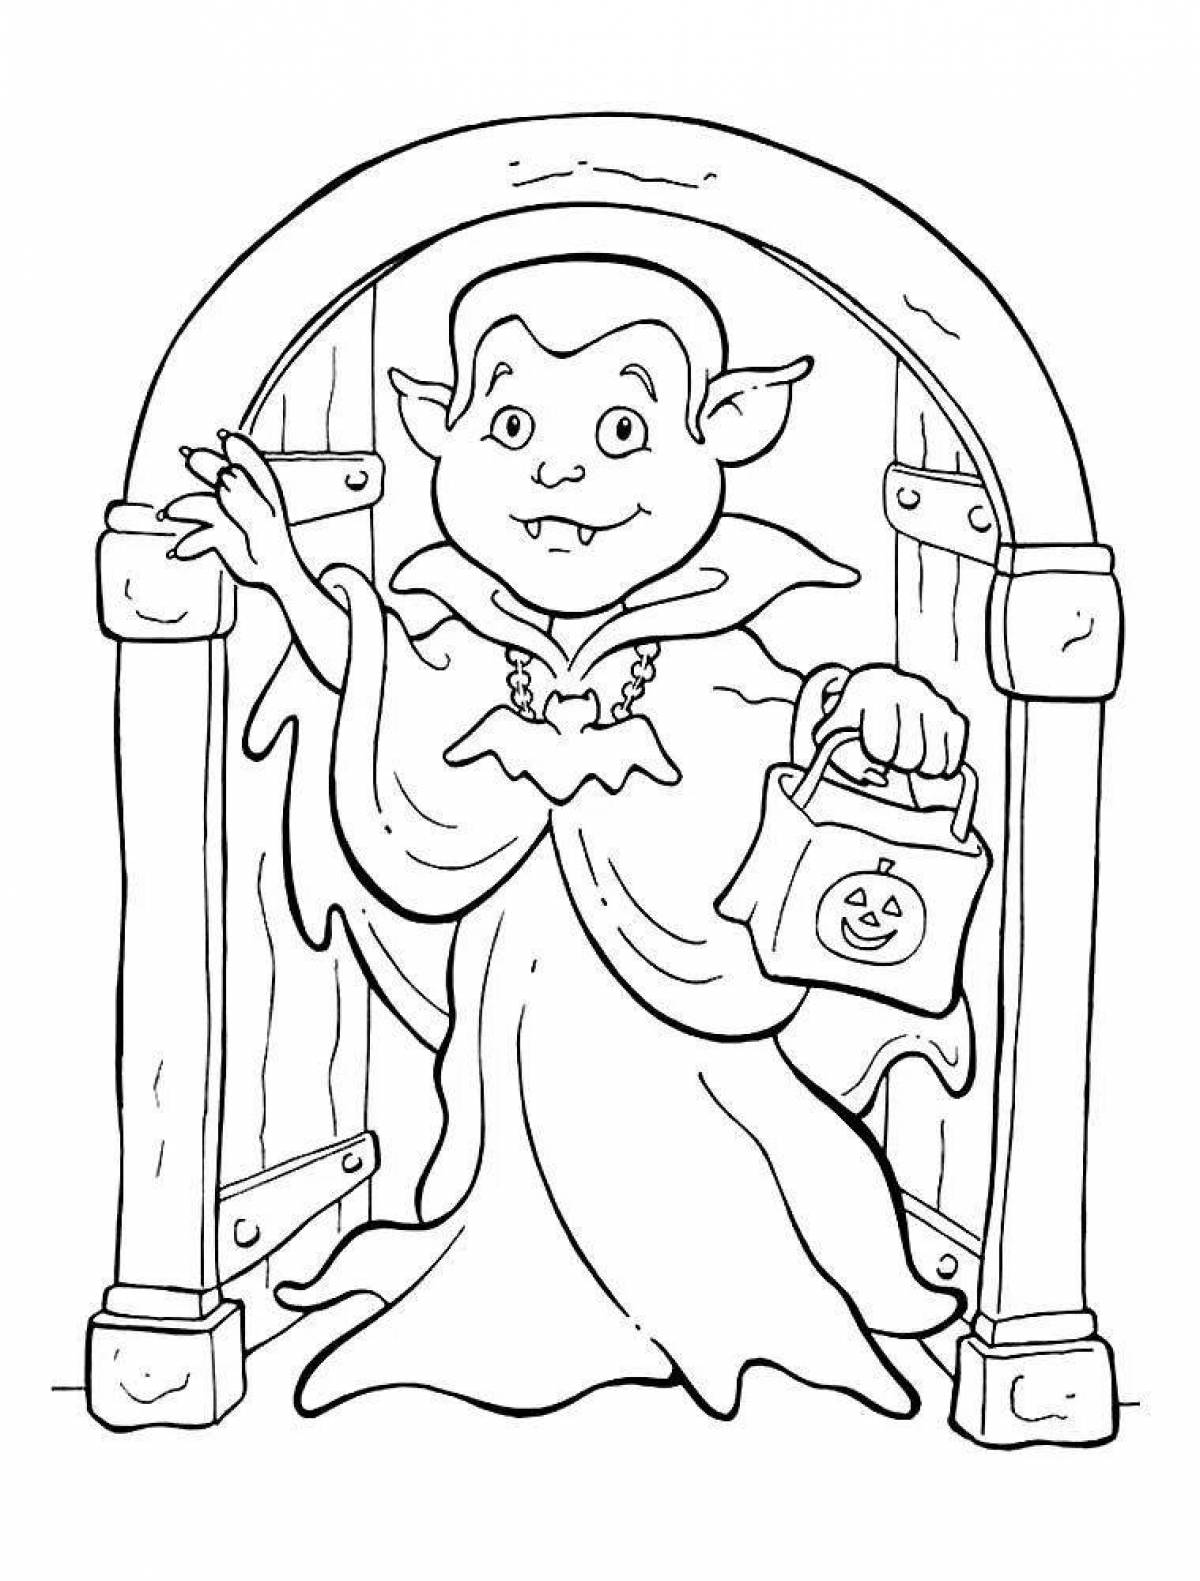 Nerving vampire coloring page for kids